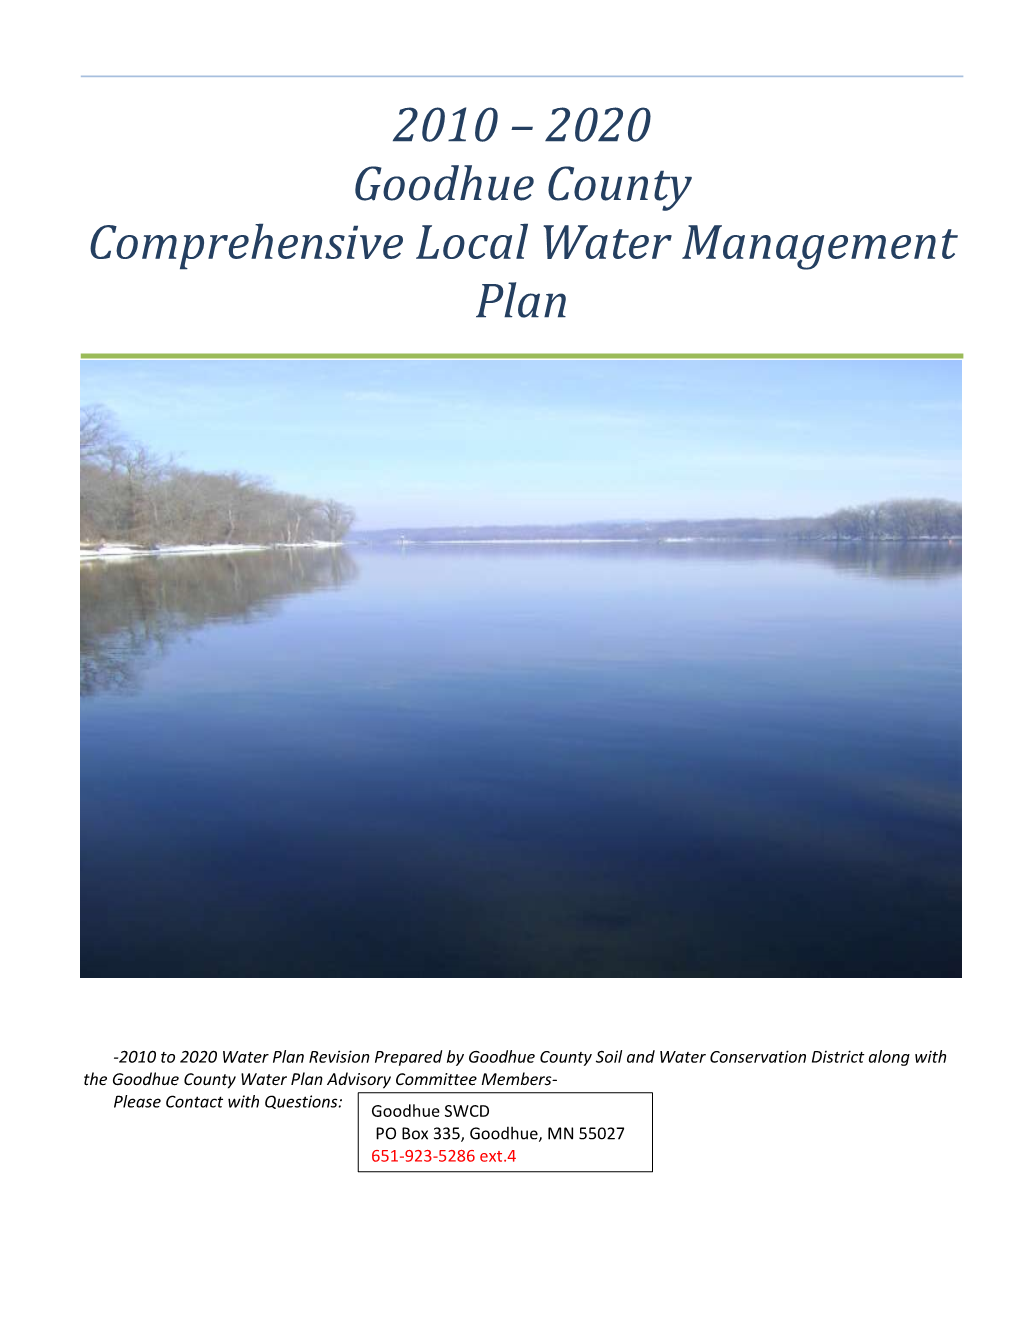 2010 – 2020 Goodhue County Comprehensive Local Water Management Plan